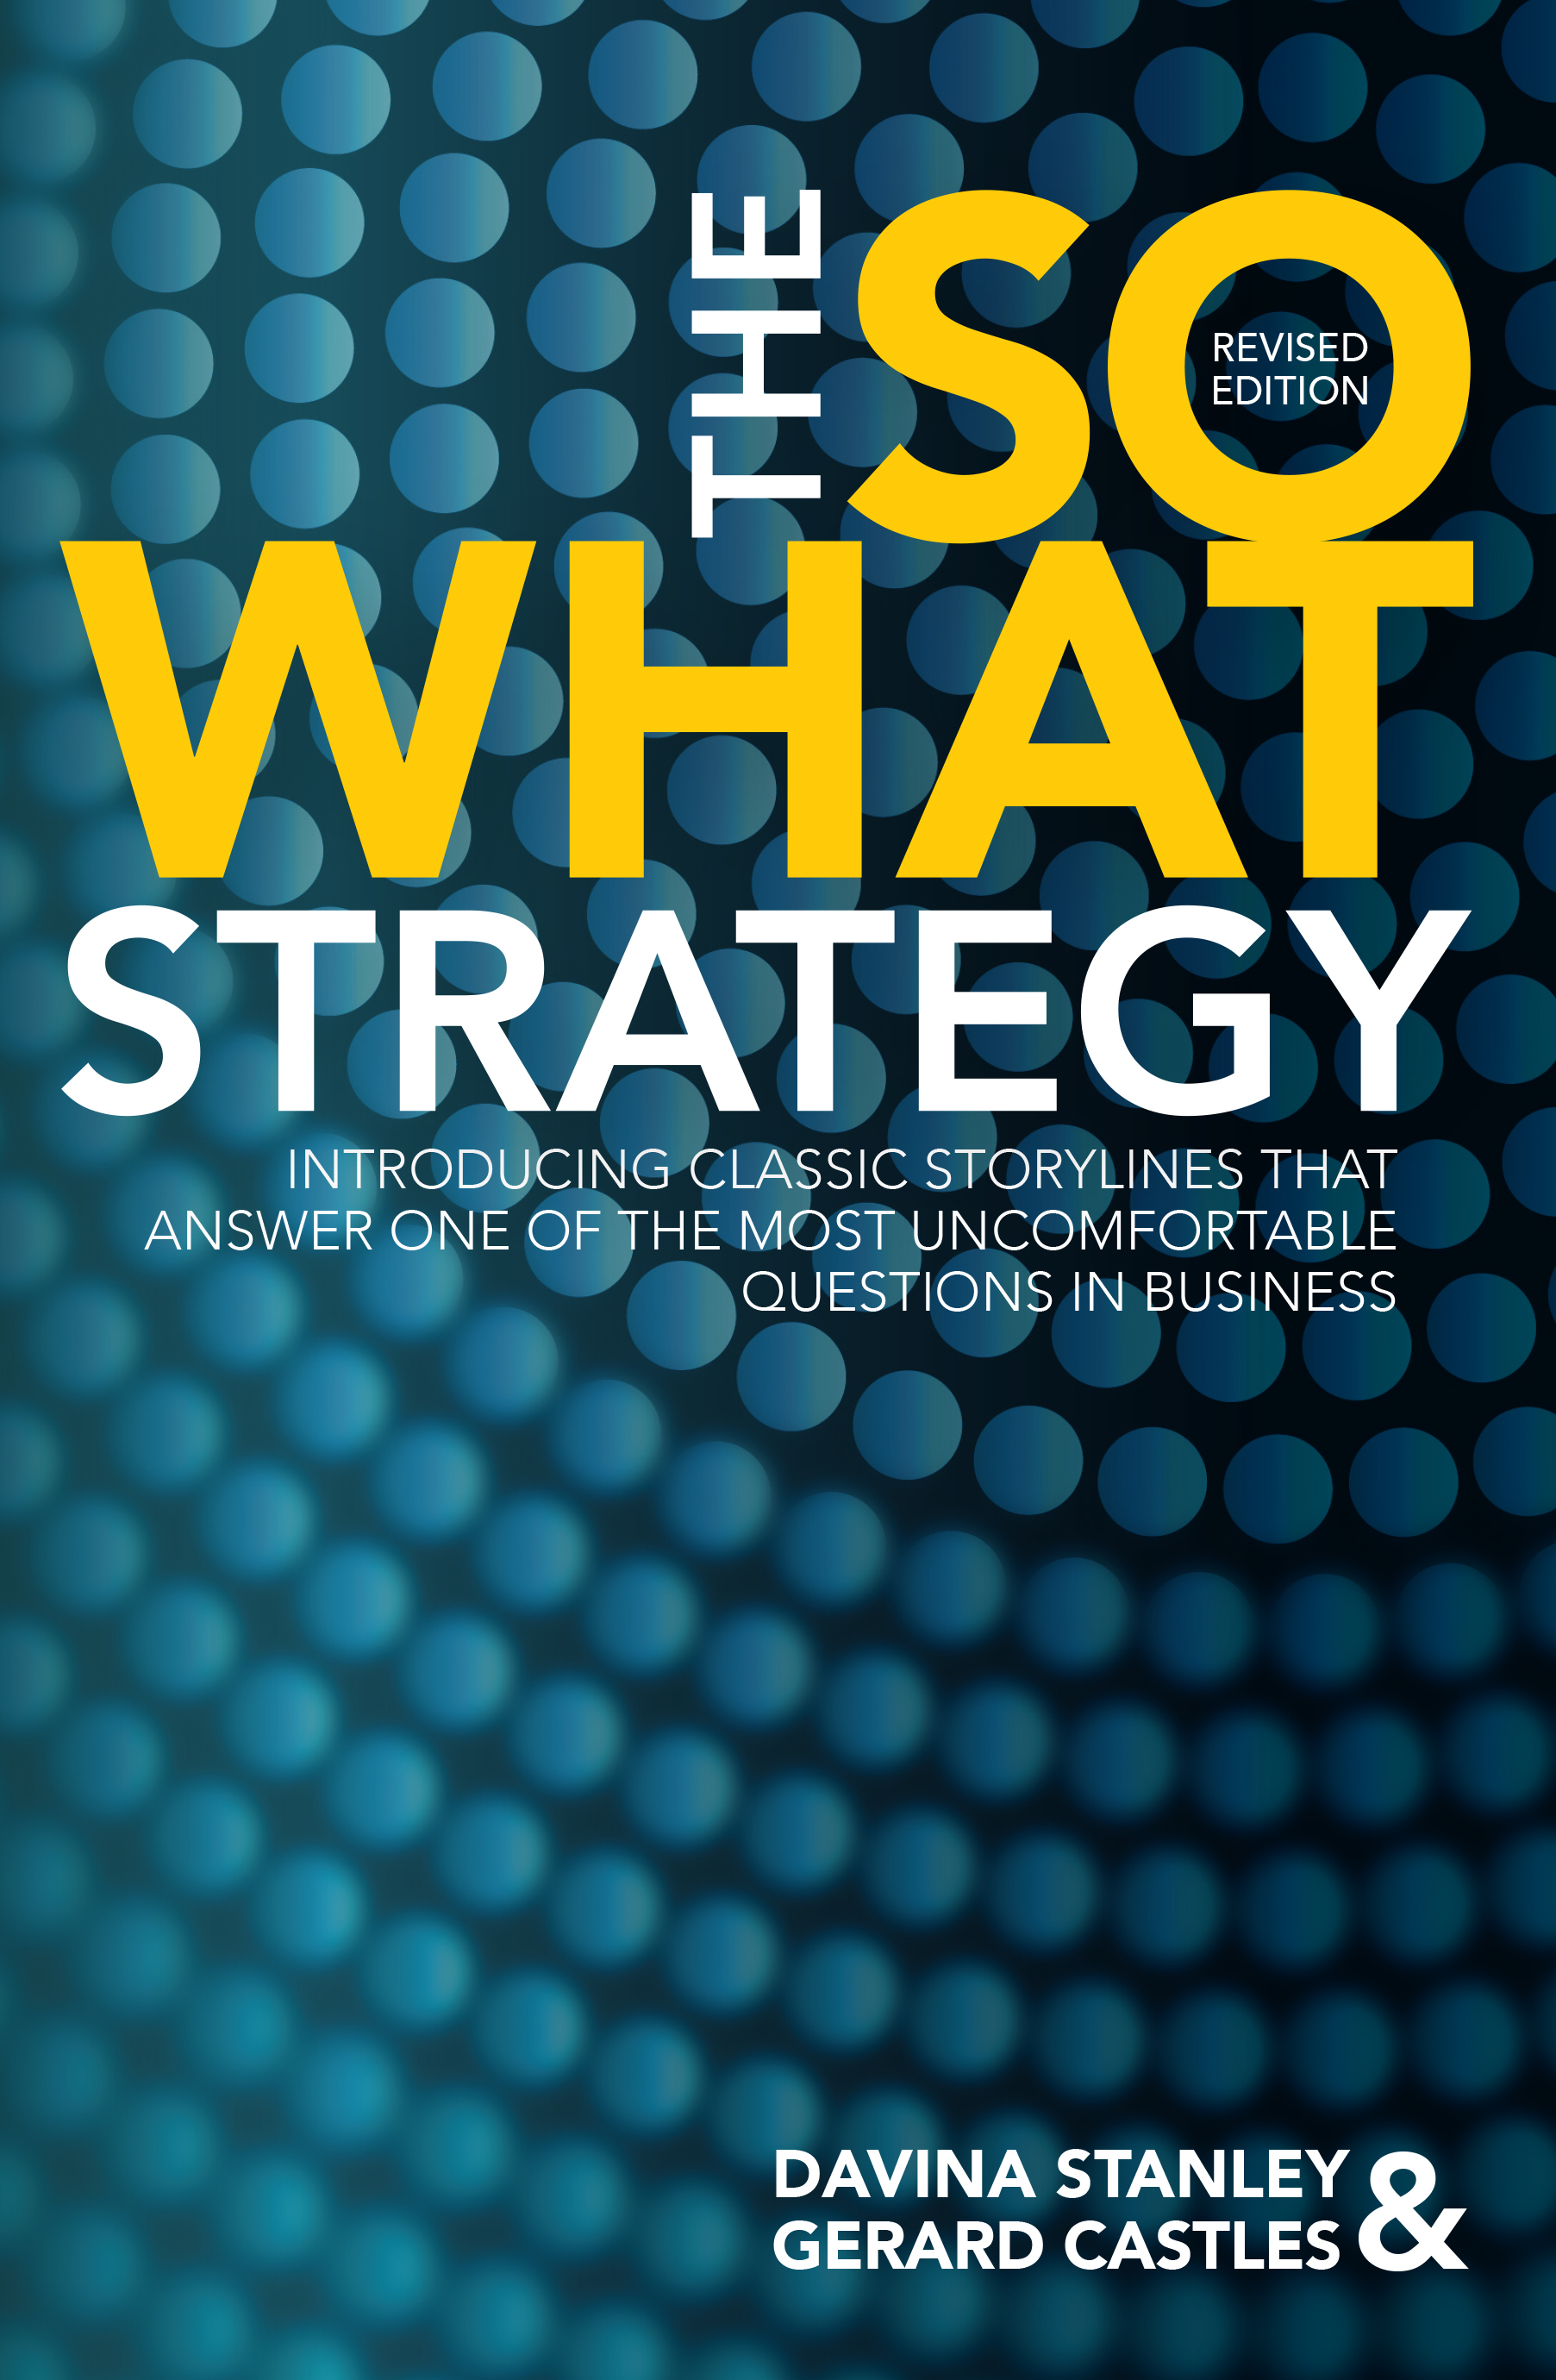 The So What Strategy Rev ed cover.jpg